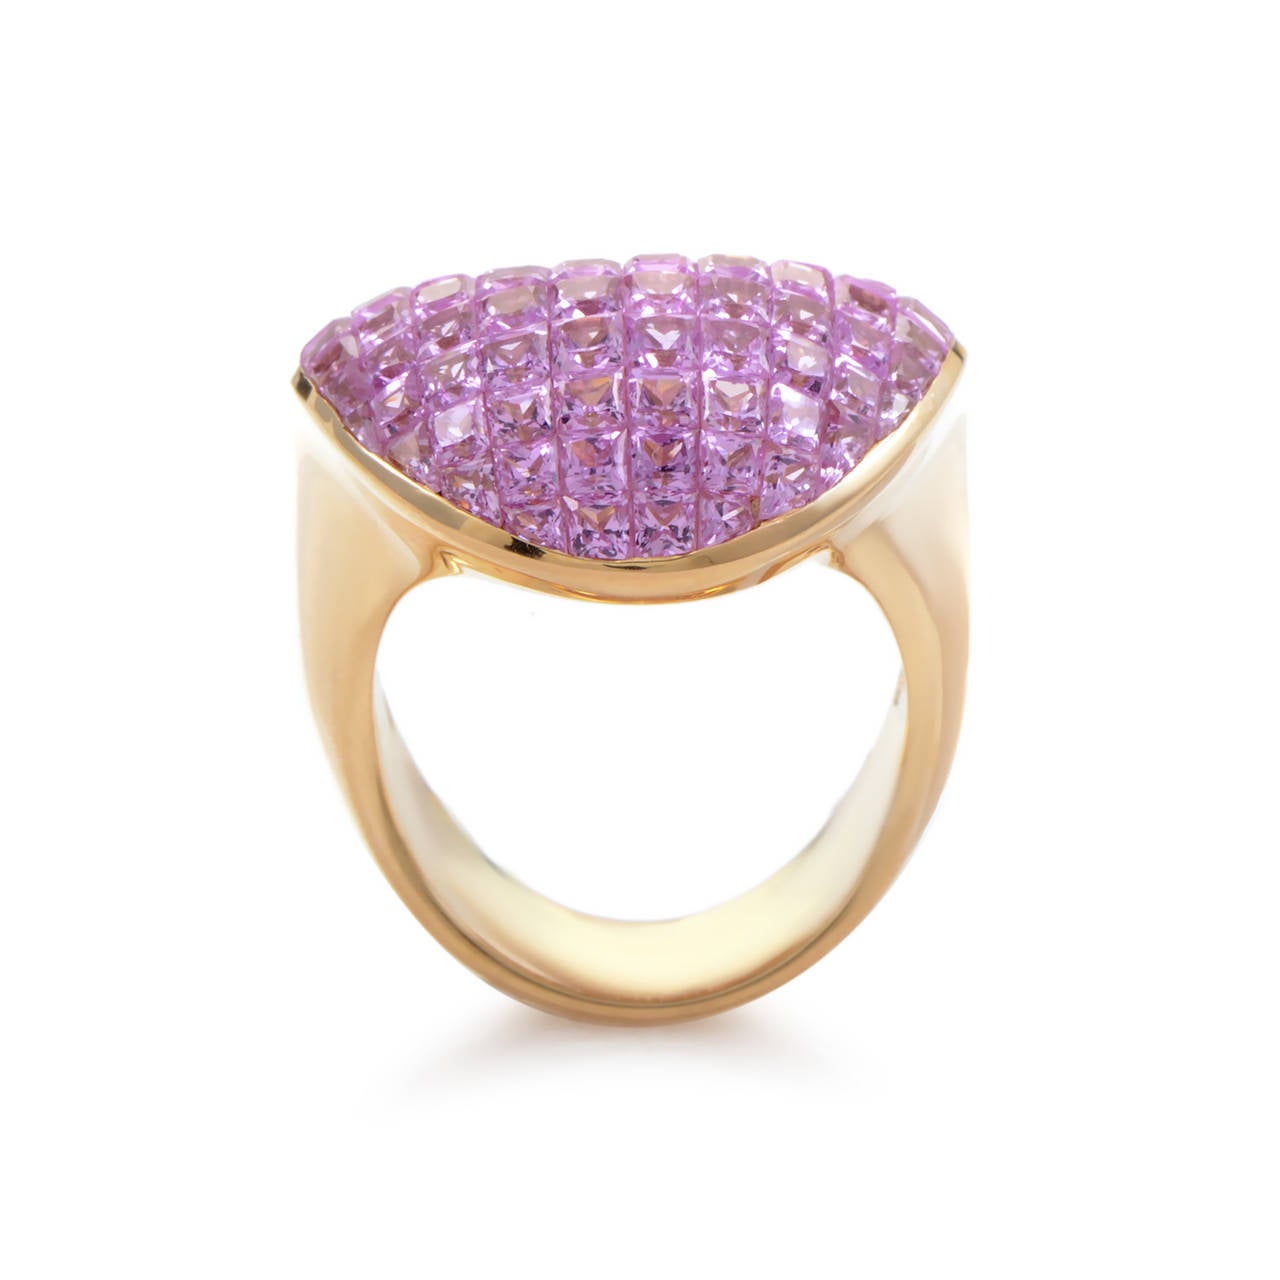 Boasting a graceful unconventional form, this gorgeous Damiani ring offers lovely romantic appearance, its main feature being the harmonious combination of radiant 18K rose gold and attractive pink sapphires weighing 6.00 carats in total.
Ring